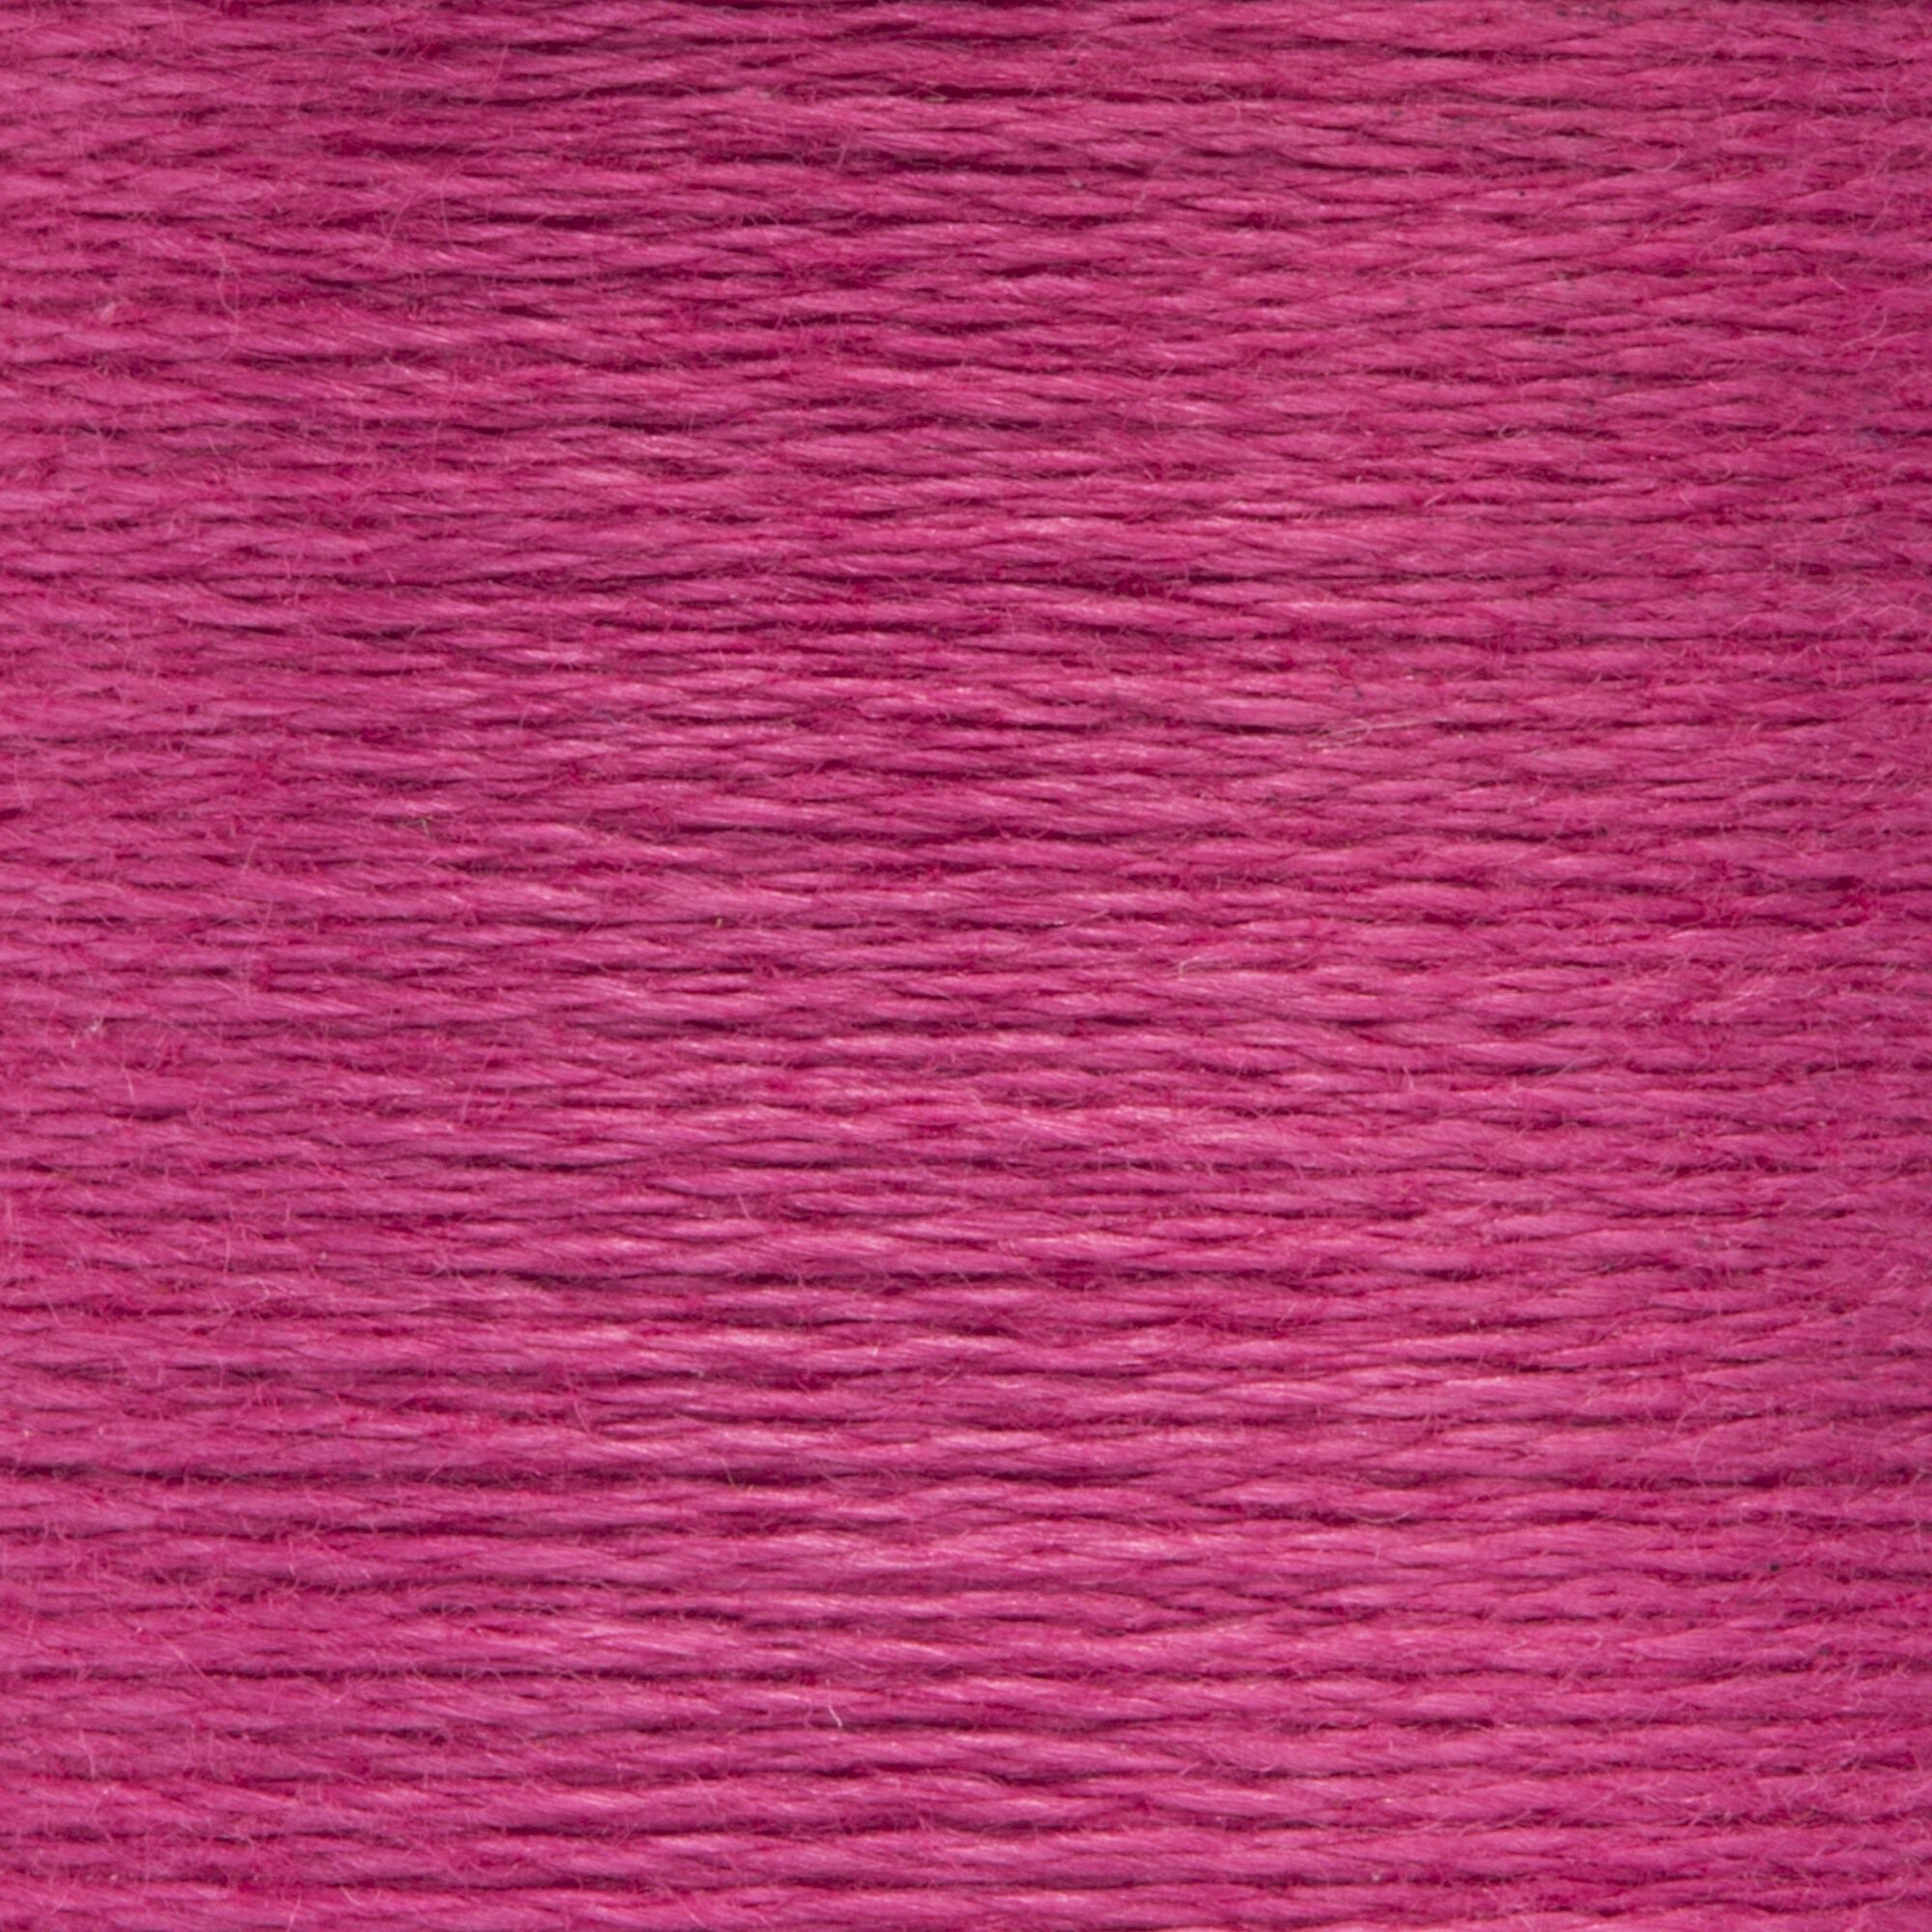 Anchor Embroidery Floss in Raspberry Med Lt